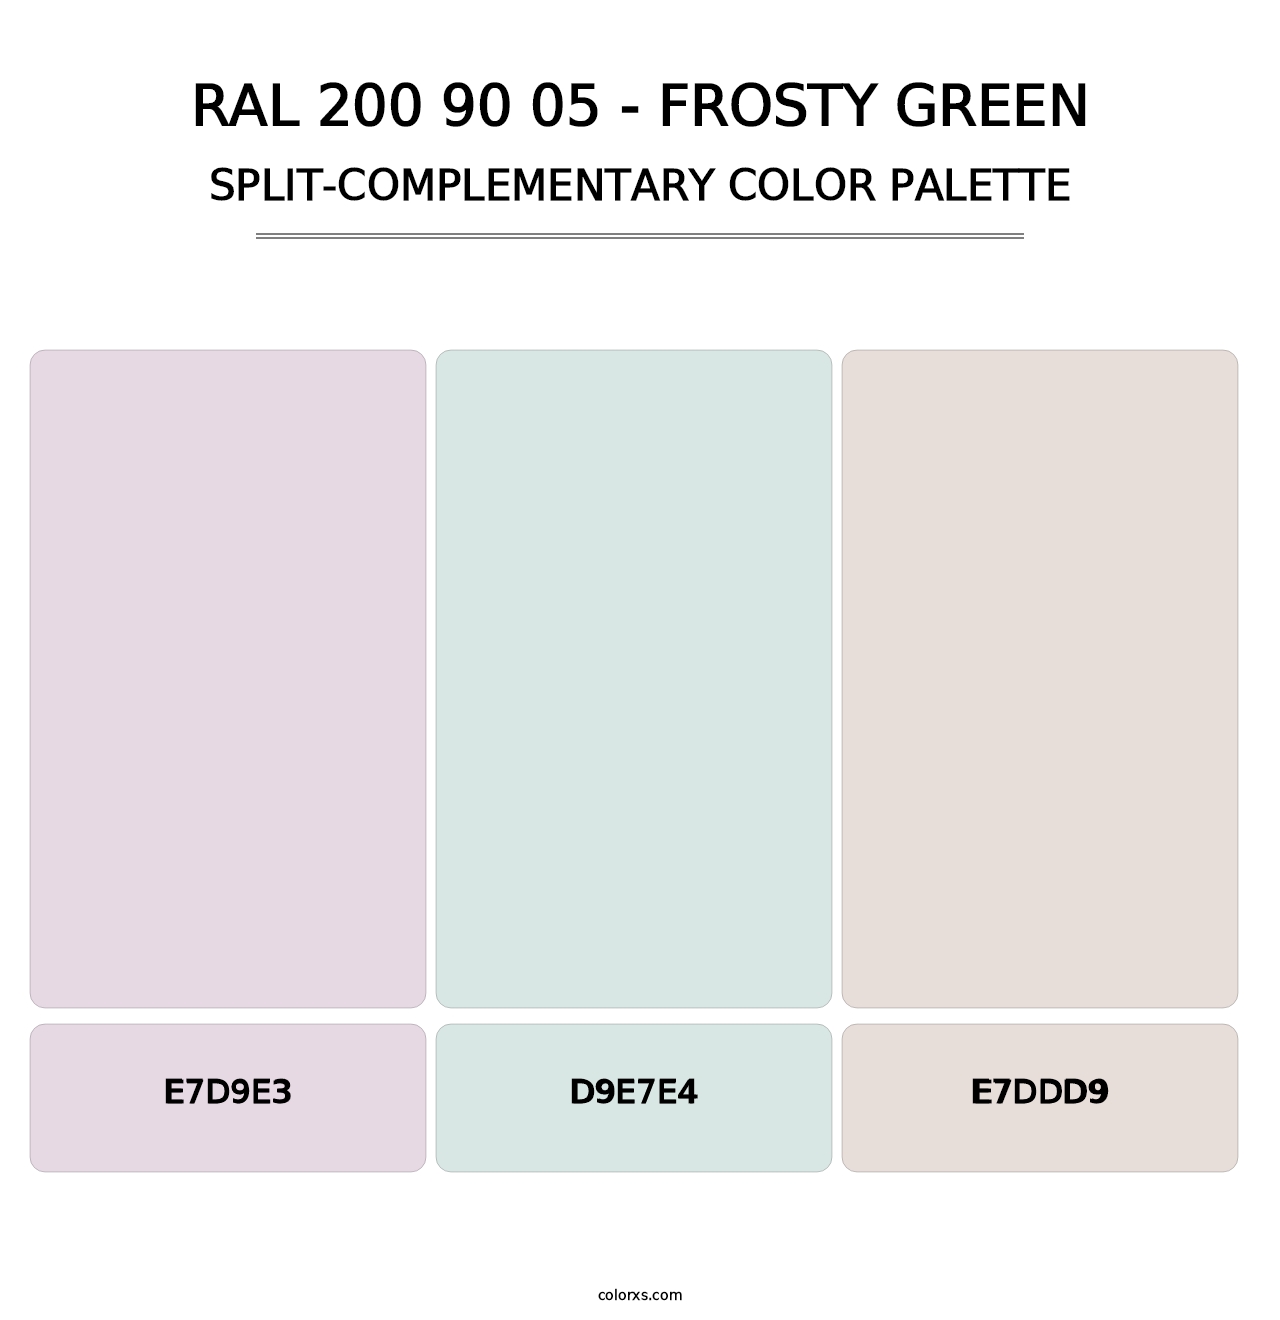 RAL 200 90 05 - Frosty Green - Split-Complementary Color Palette